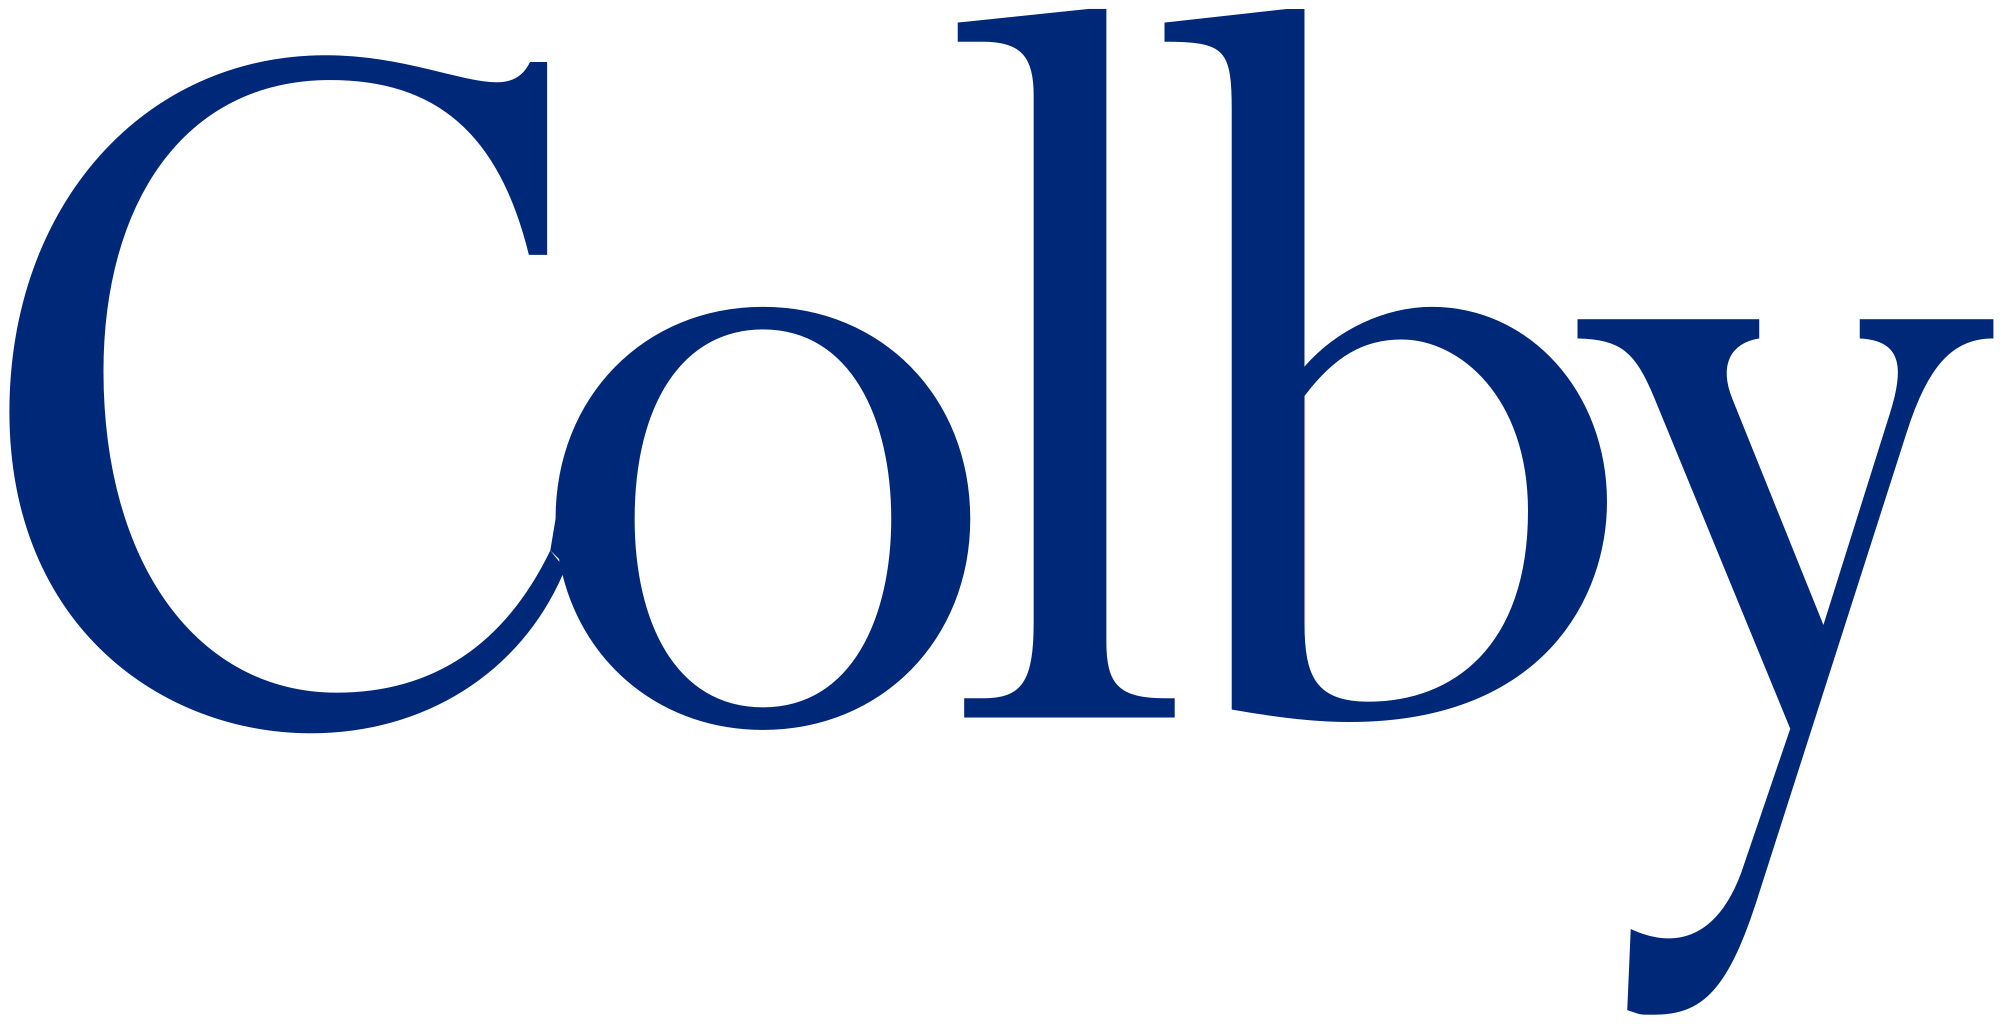 Colby College Logo - File:Colby College logo.svg - Wikimedia Commons